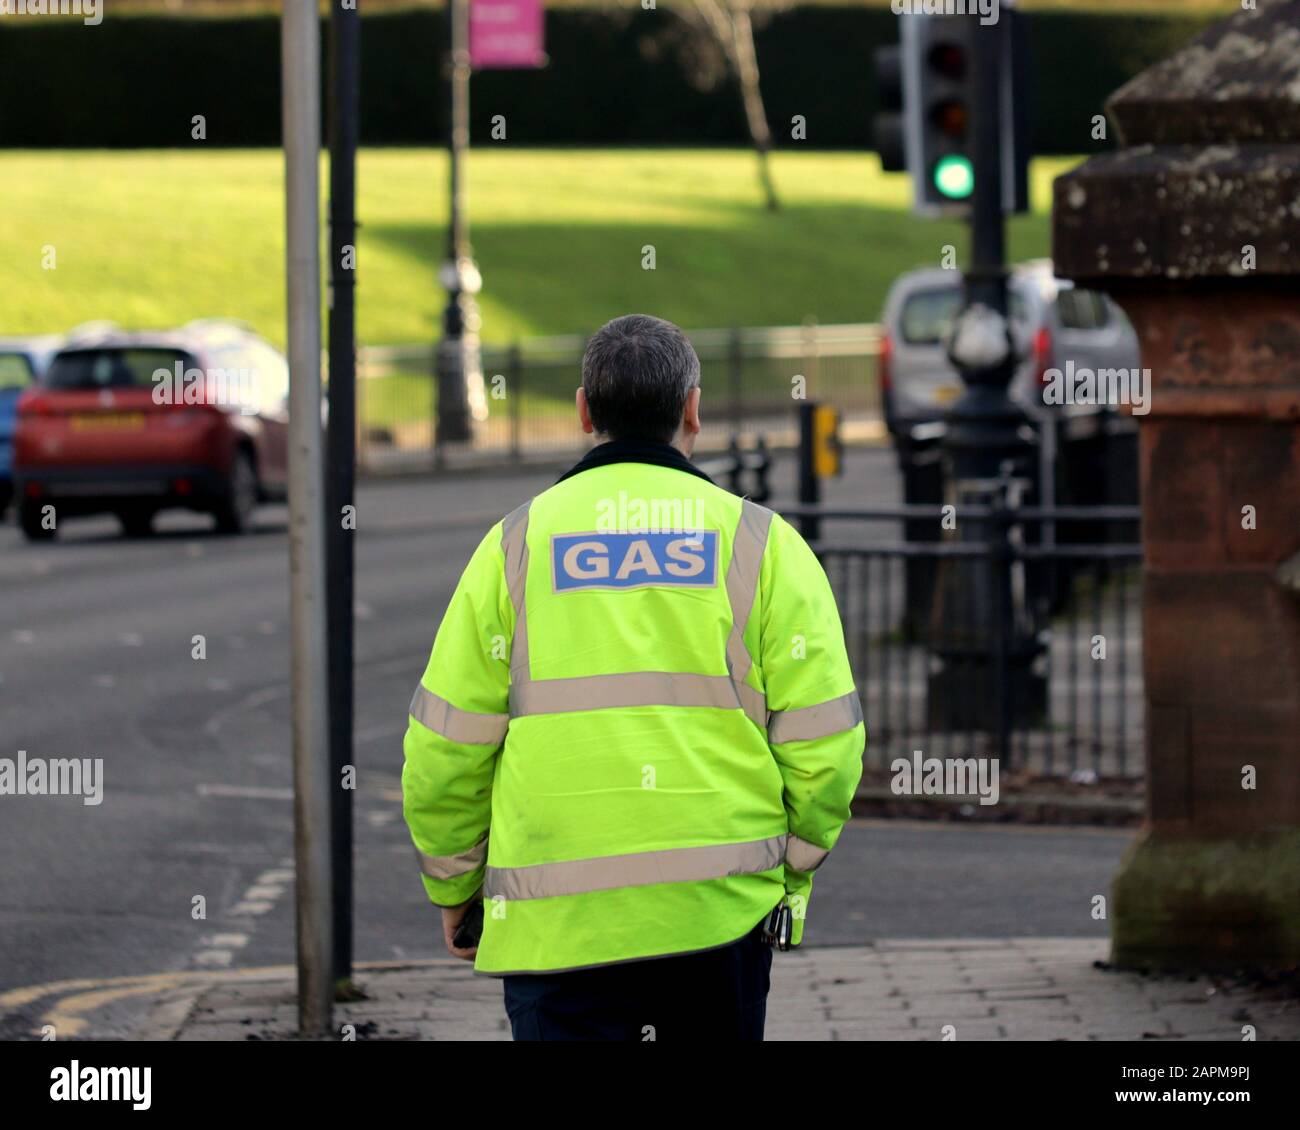 Gas worker in high visibility vest  walking on the street viewed from behind Stock Photo